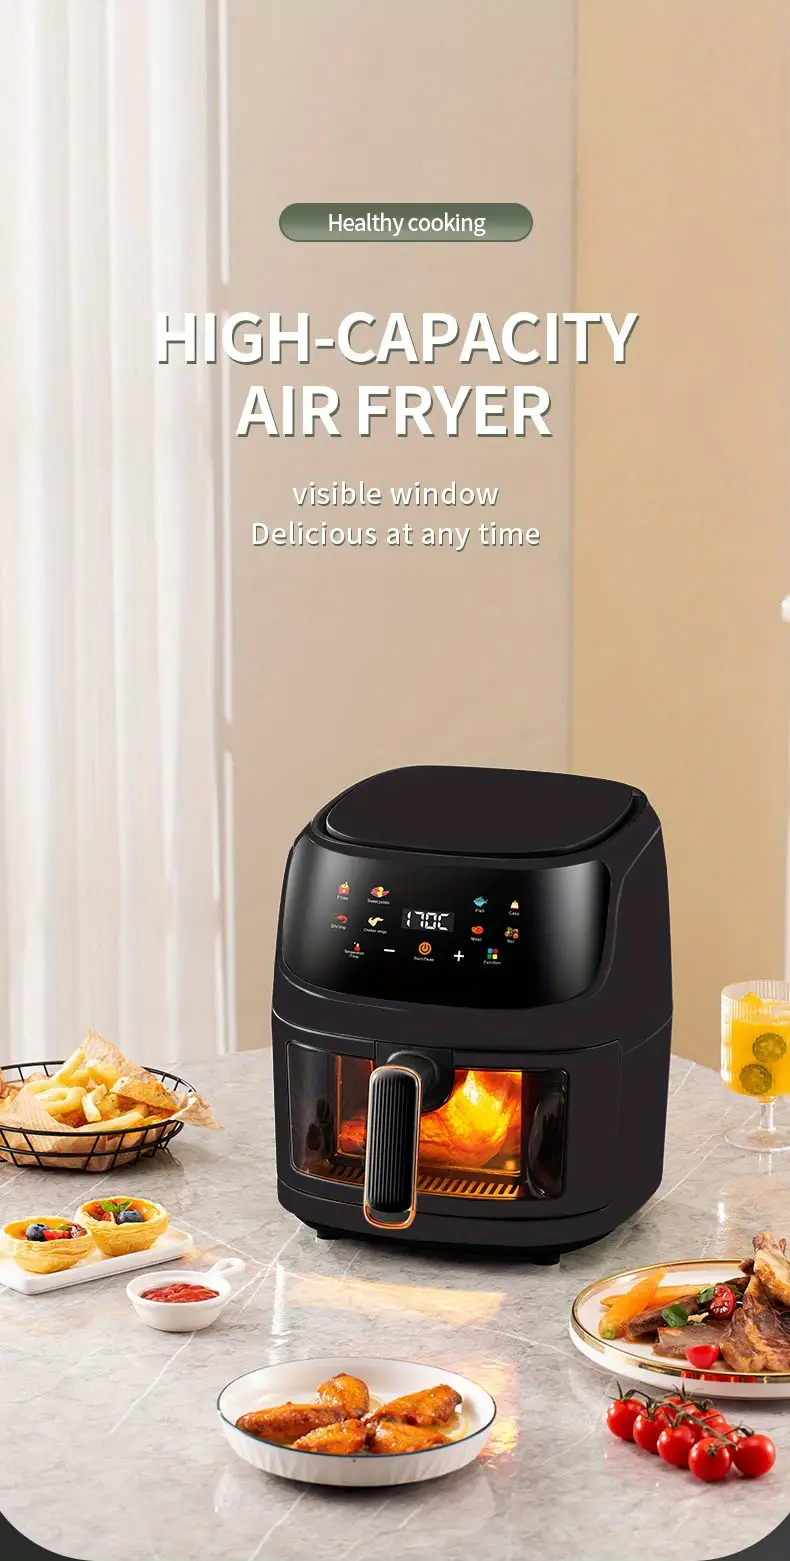 air fryer large colorful touch screen electric fryer 6l capacity working time and temperature adjustable multifunctional convenient air fryer for home details 0